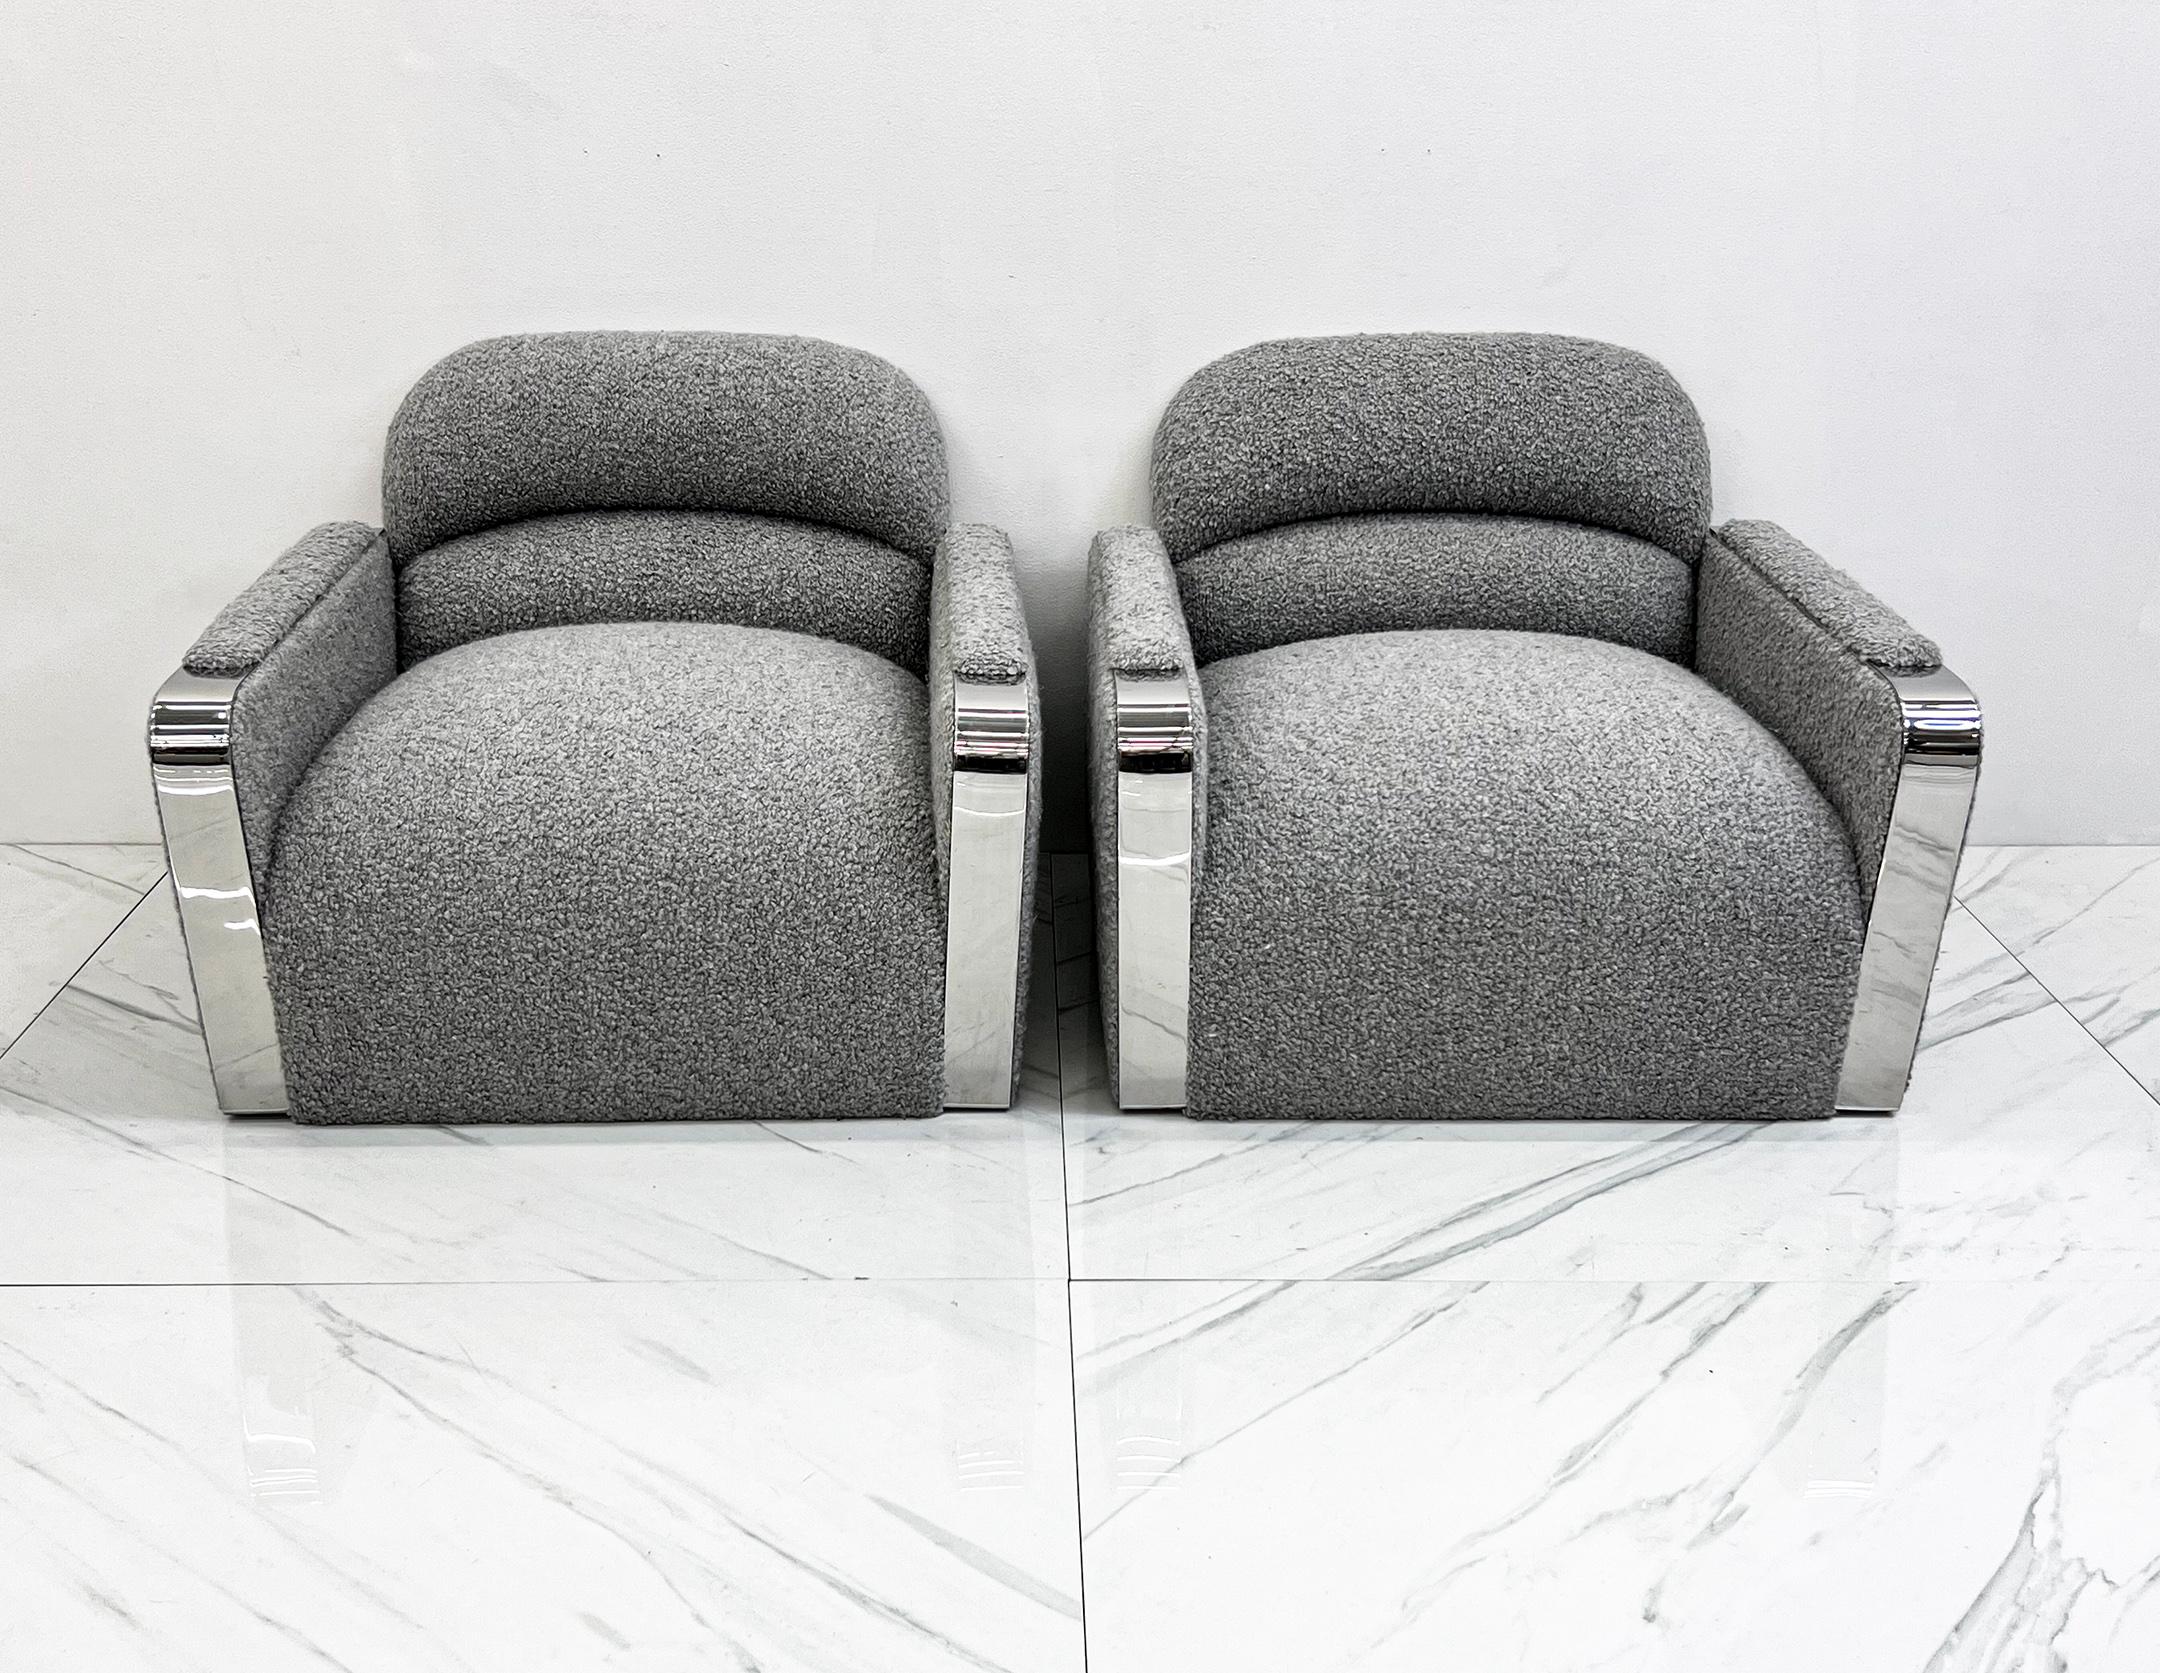 Late 20th Century Lounge Chairs by Stanley Jay Friedman for Brueton, Gray Boucle, 1980's, a Pair For Sale